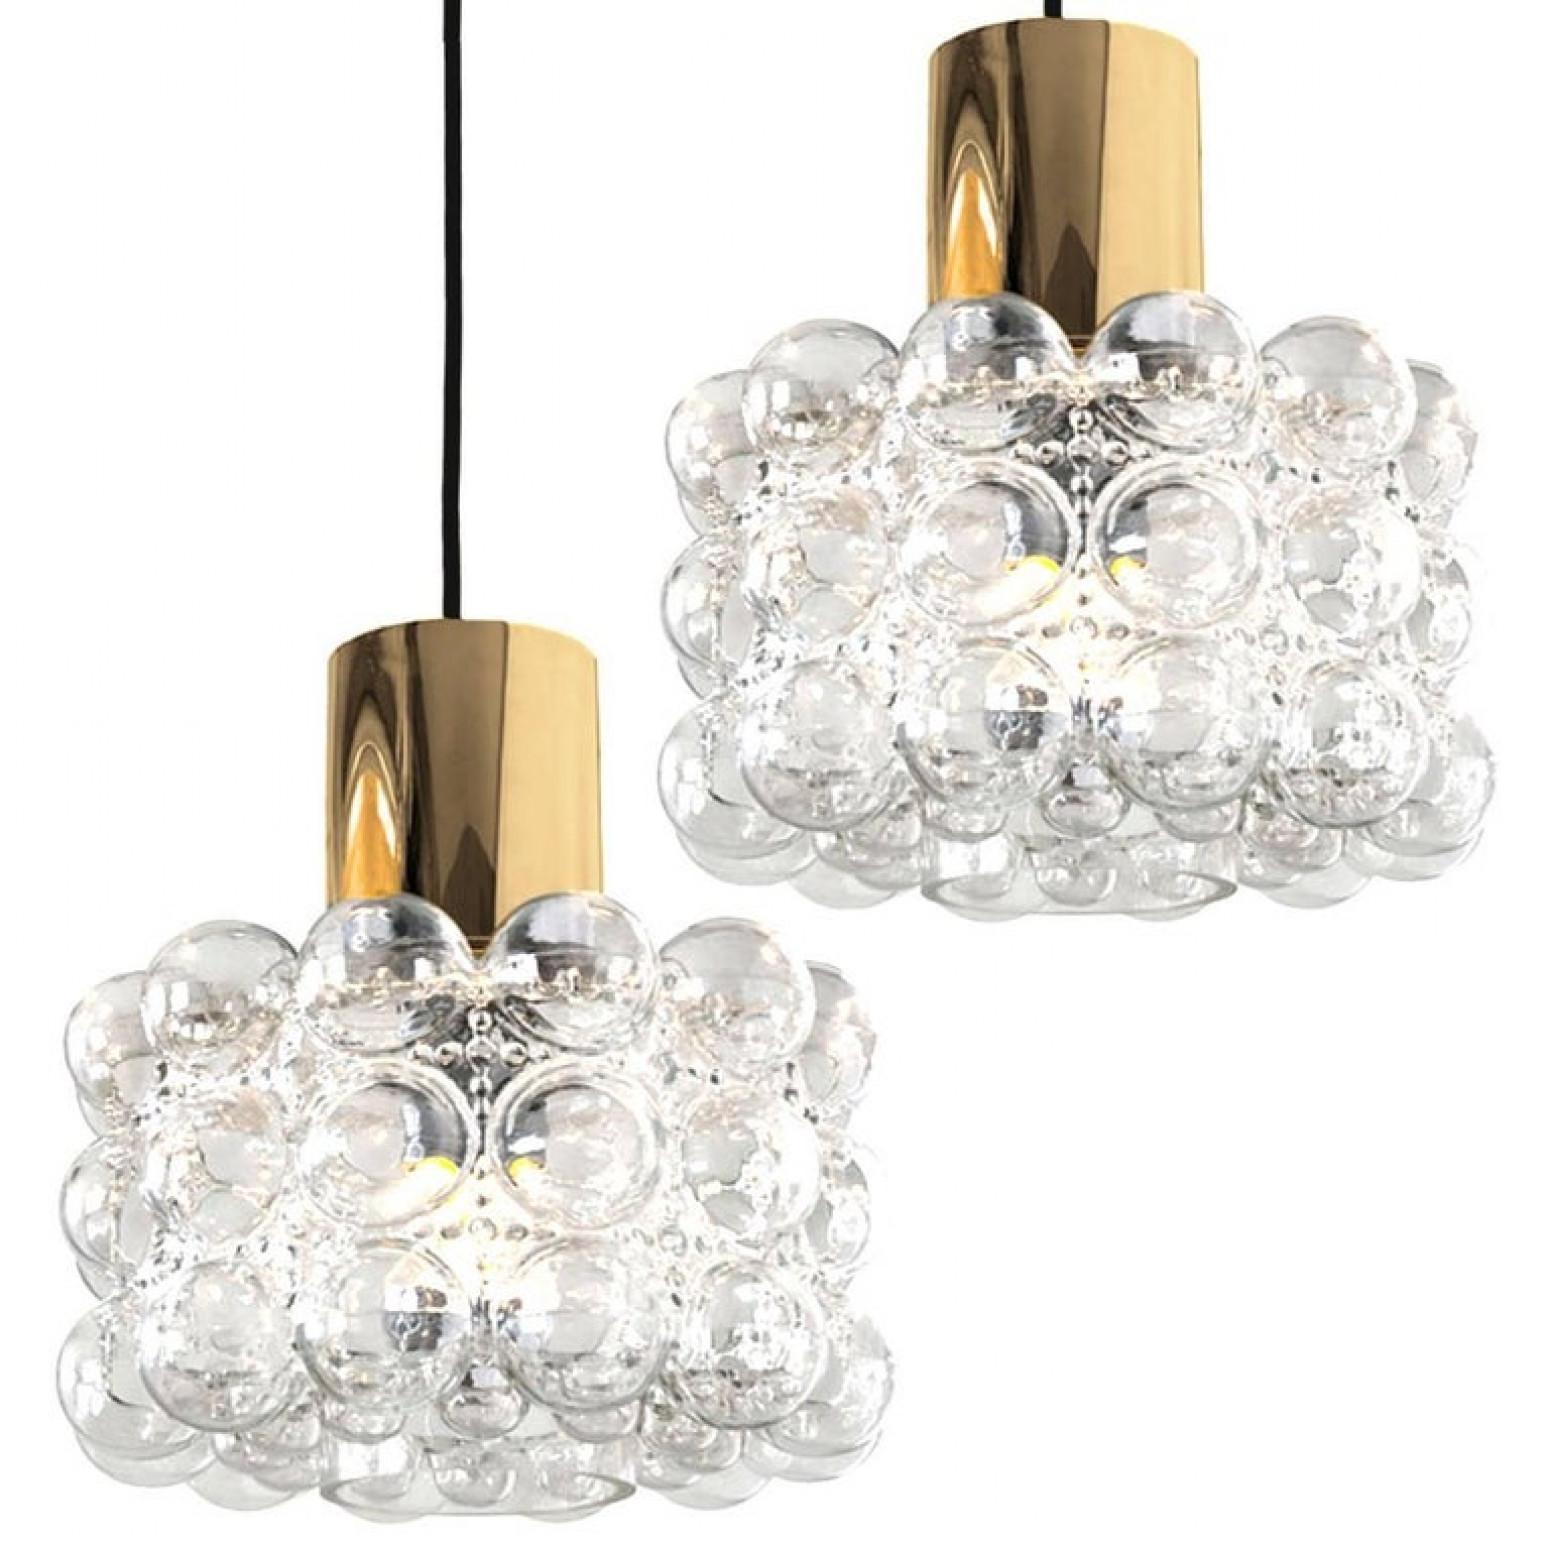 Pair of beautiful bubble glass chandeliers or pendant lights designed by Helena Tynell for Glashütte Limburg. A design Classic, the hand blown glass gives a wonderful warm glow.

The dimensions: Height 80 cm from ceiling, the diameter 30 cm. Height